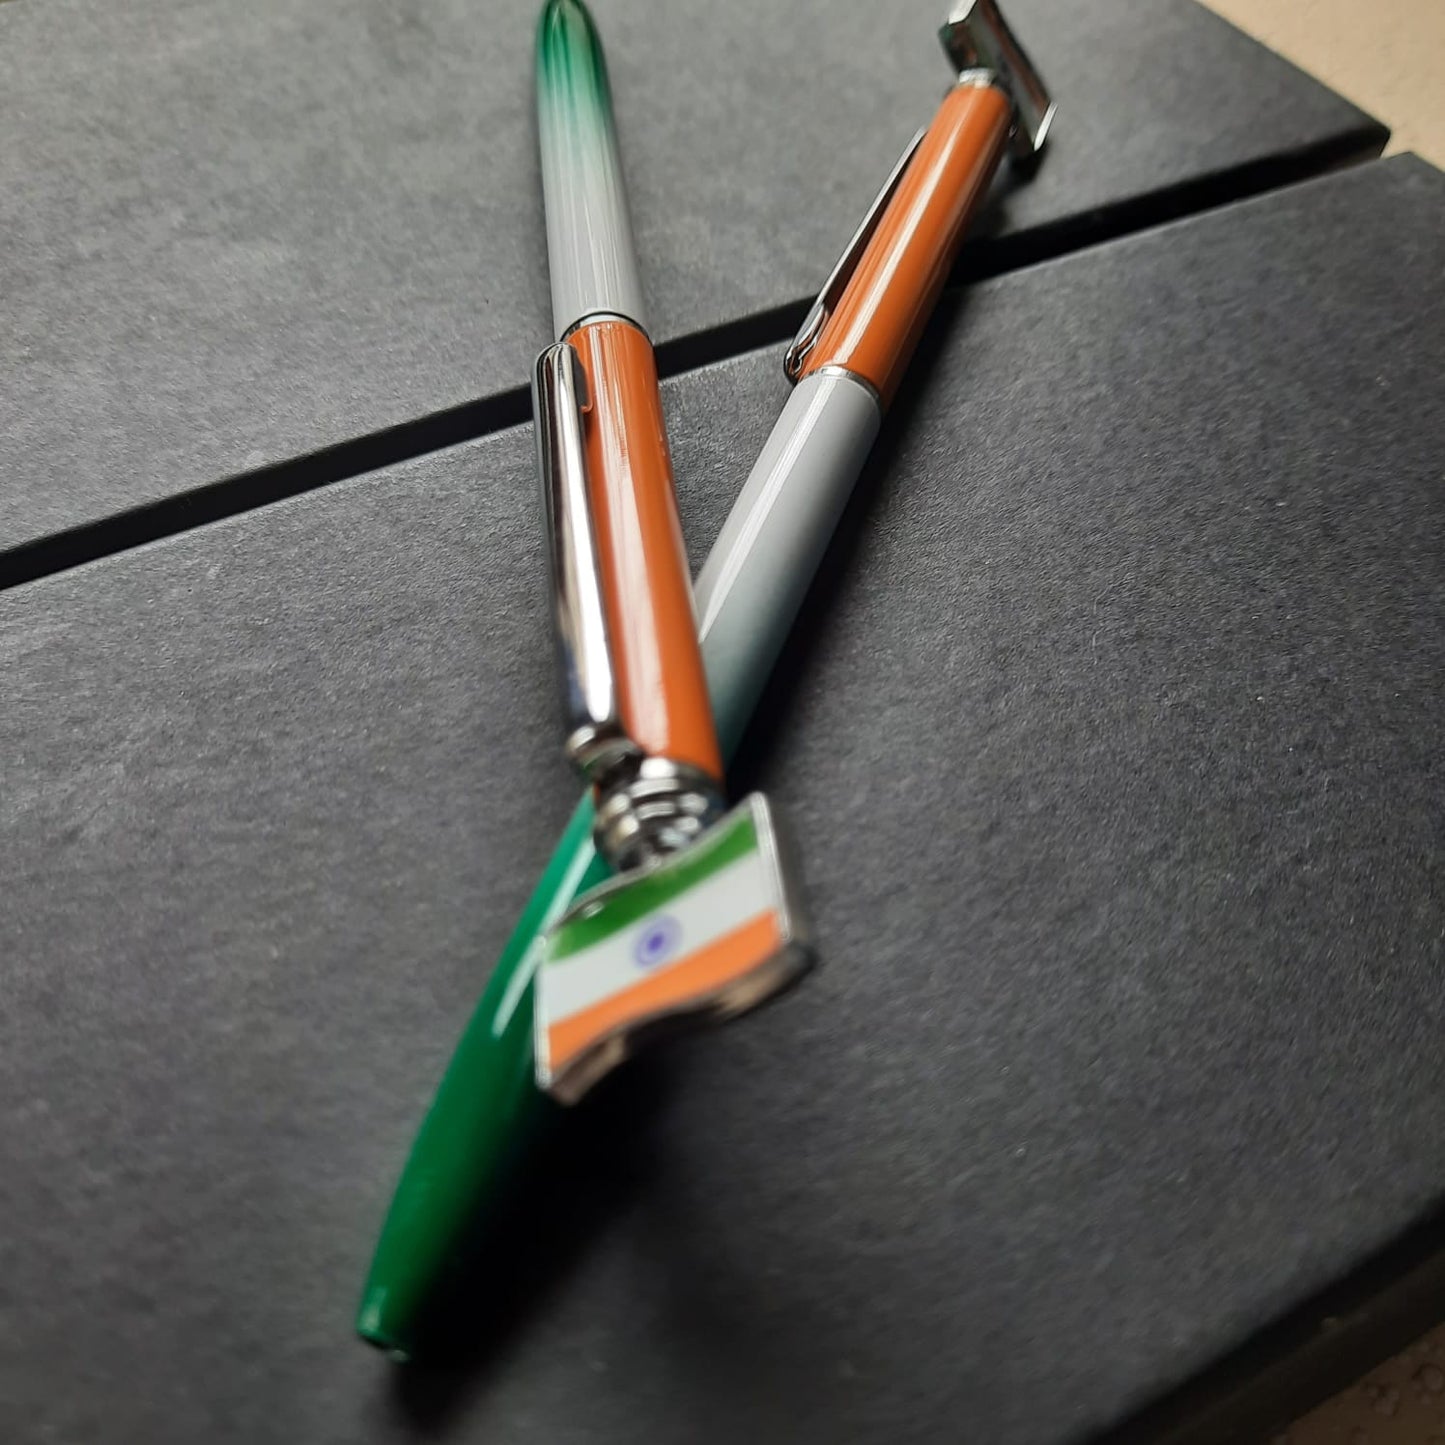 Metal Indian Flag Tricolor Unbreakable Metal Pen - Independence Day or Republic Day Corporate Gift Item